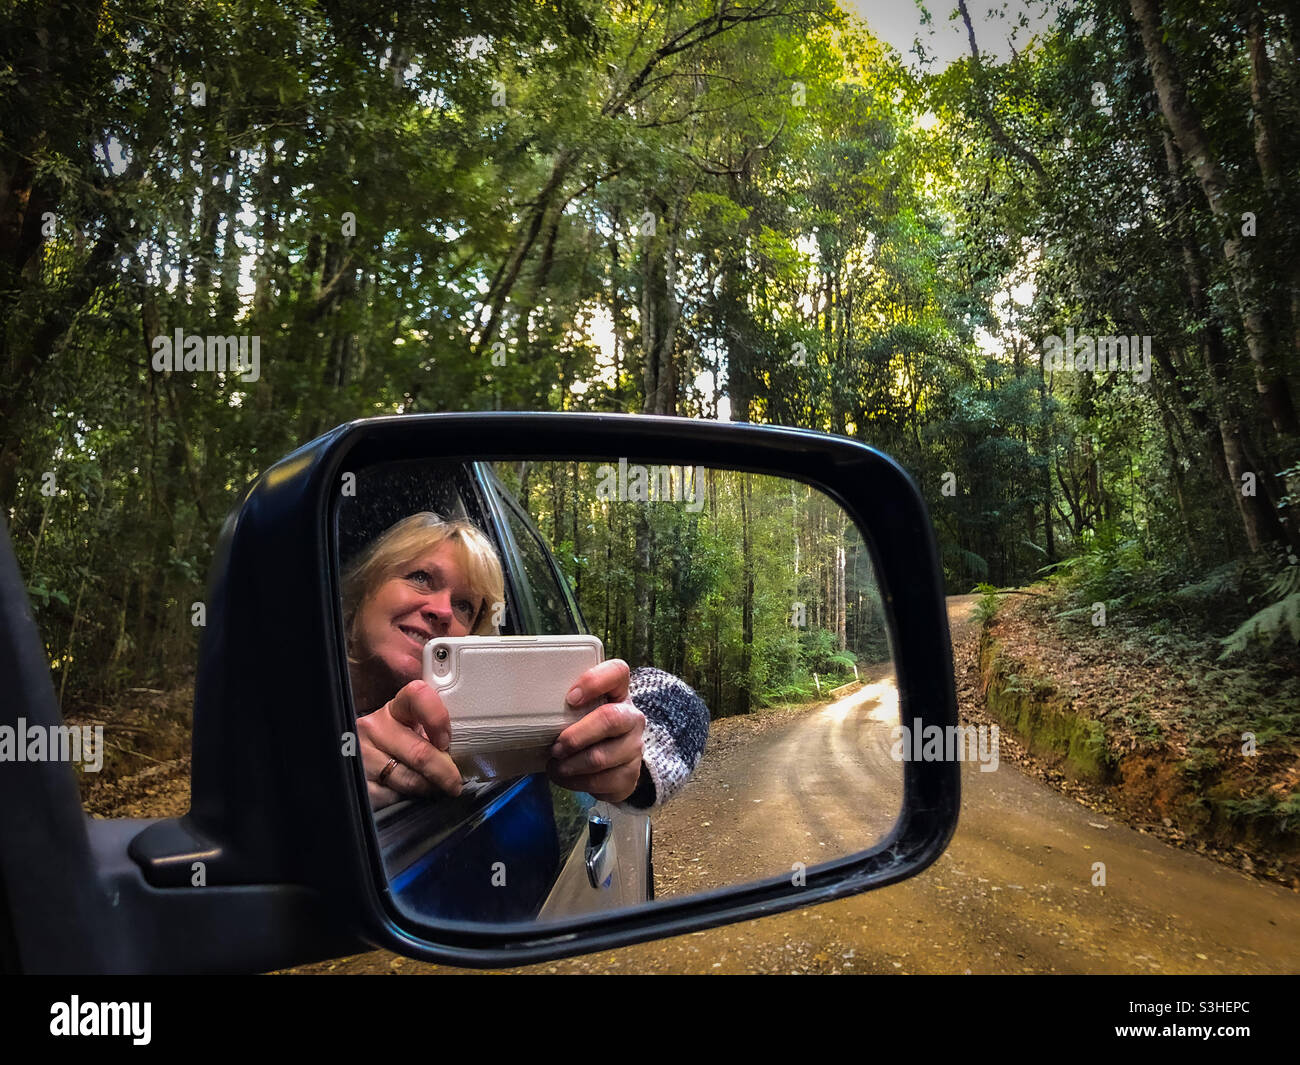 Beautiful blonde woman leaning out of a car window to take a photo of the Australian Bush in a national park along a winding dirt road, catching her reflection in the rear view mirror. Stock Photo